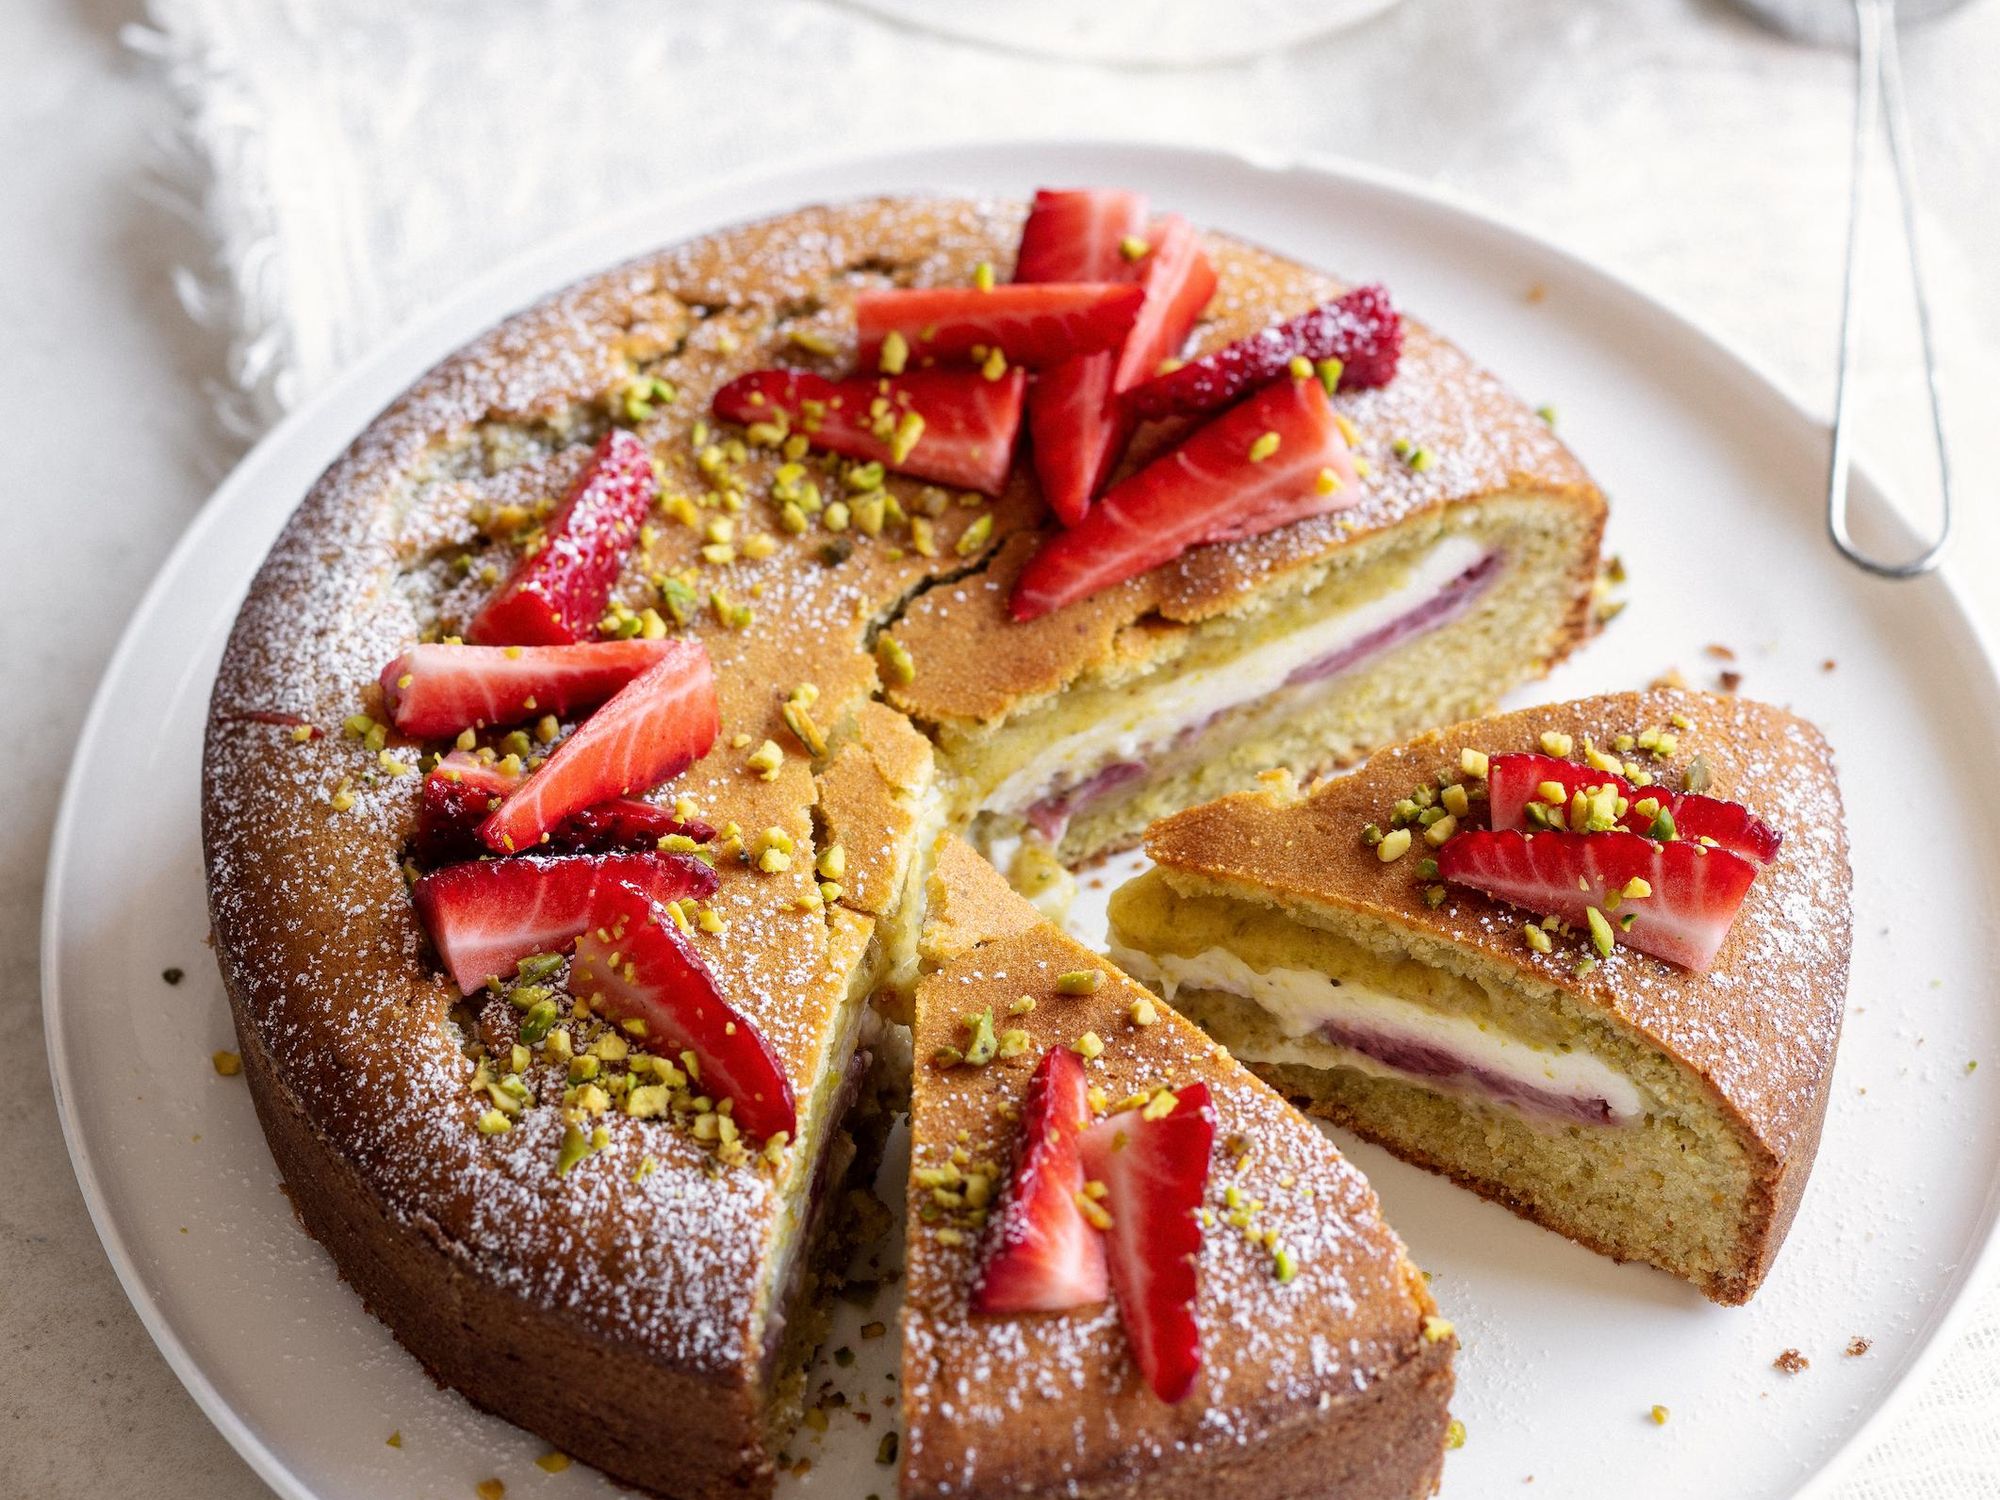 Pistachio cake with strawberries and ricotta